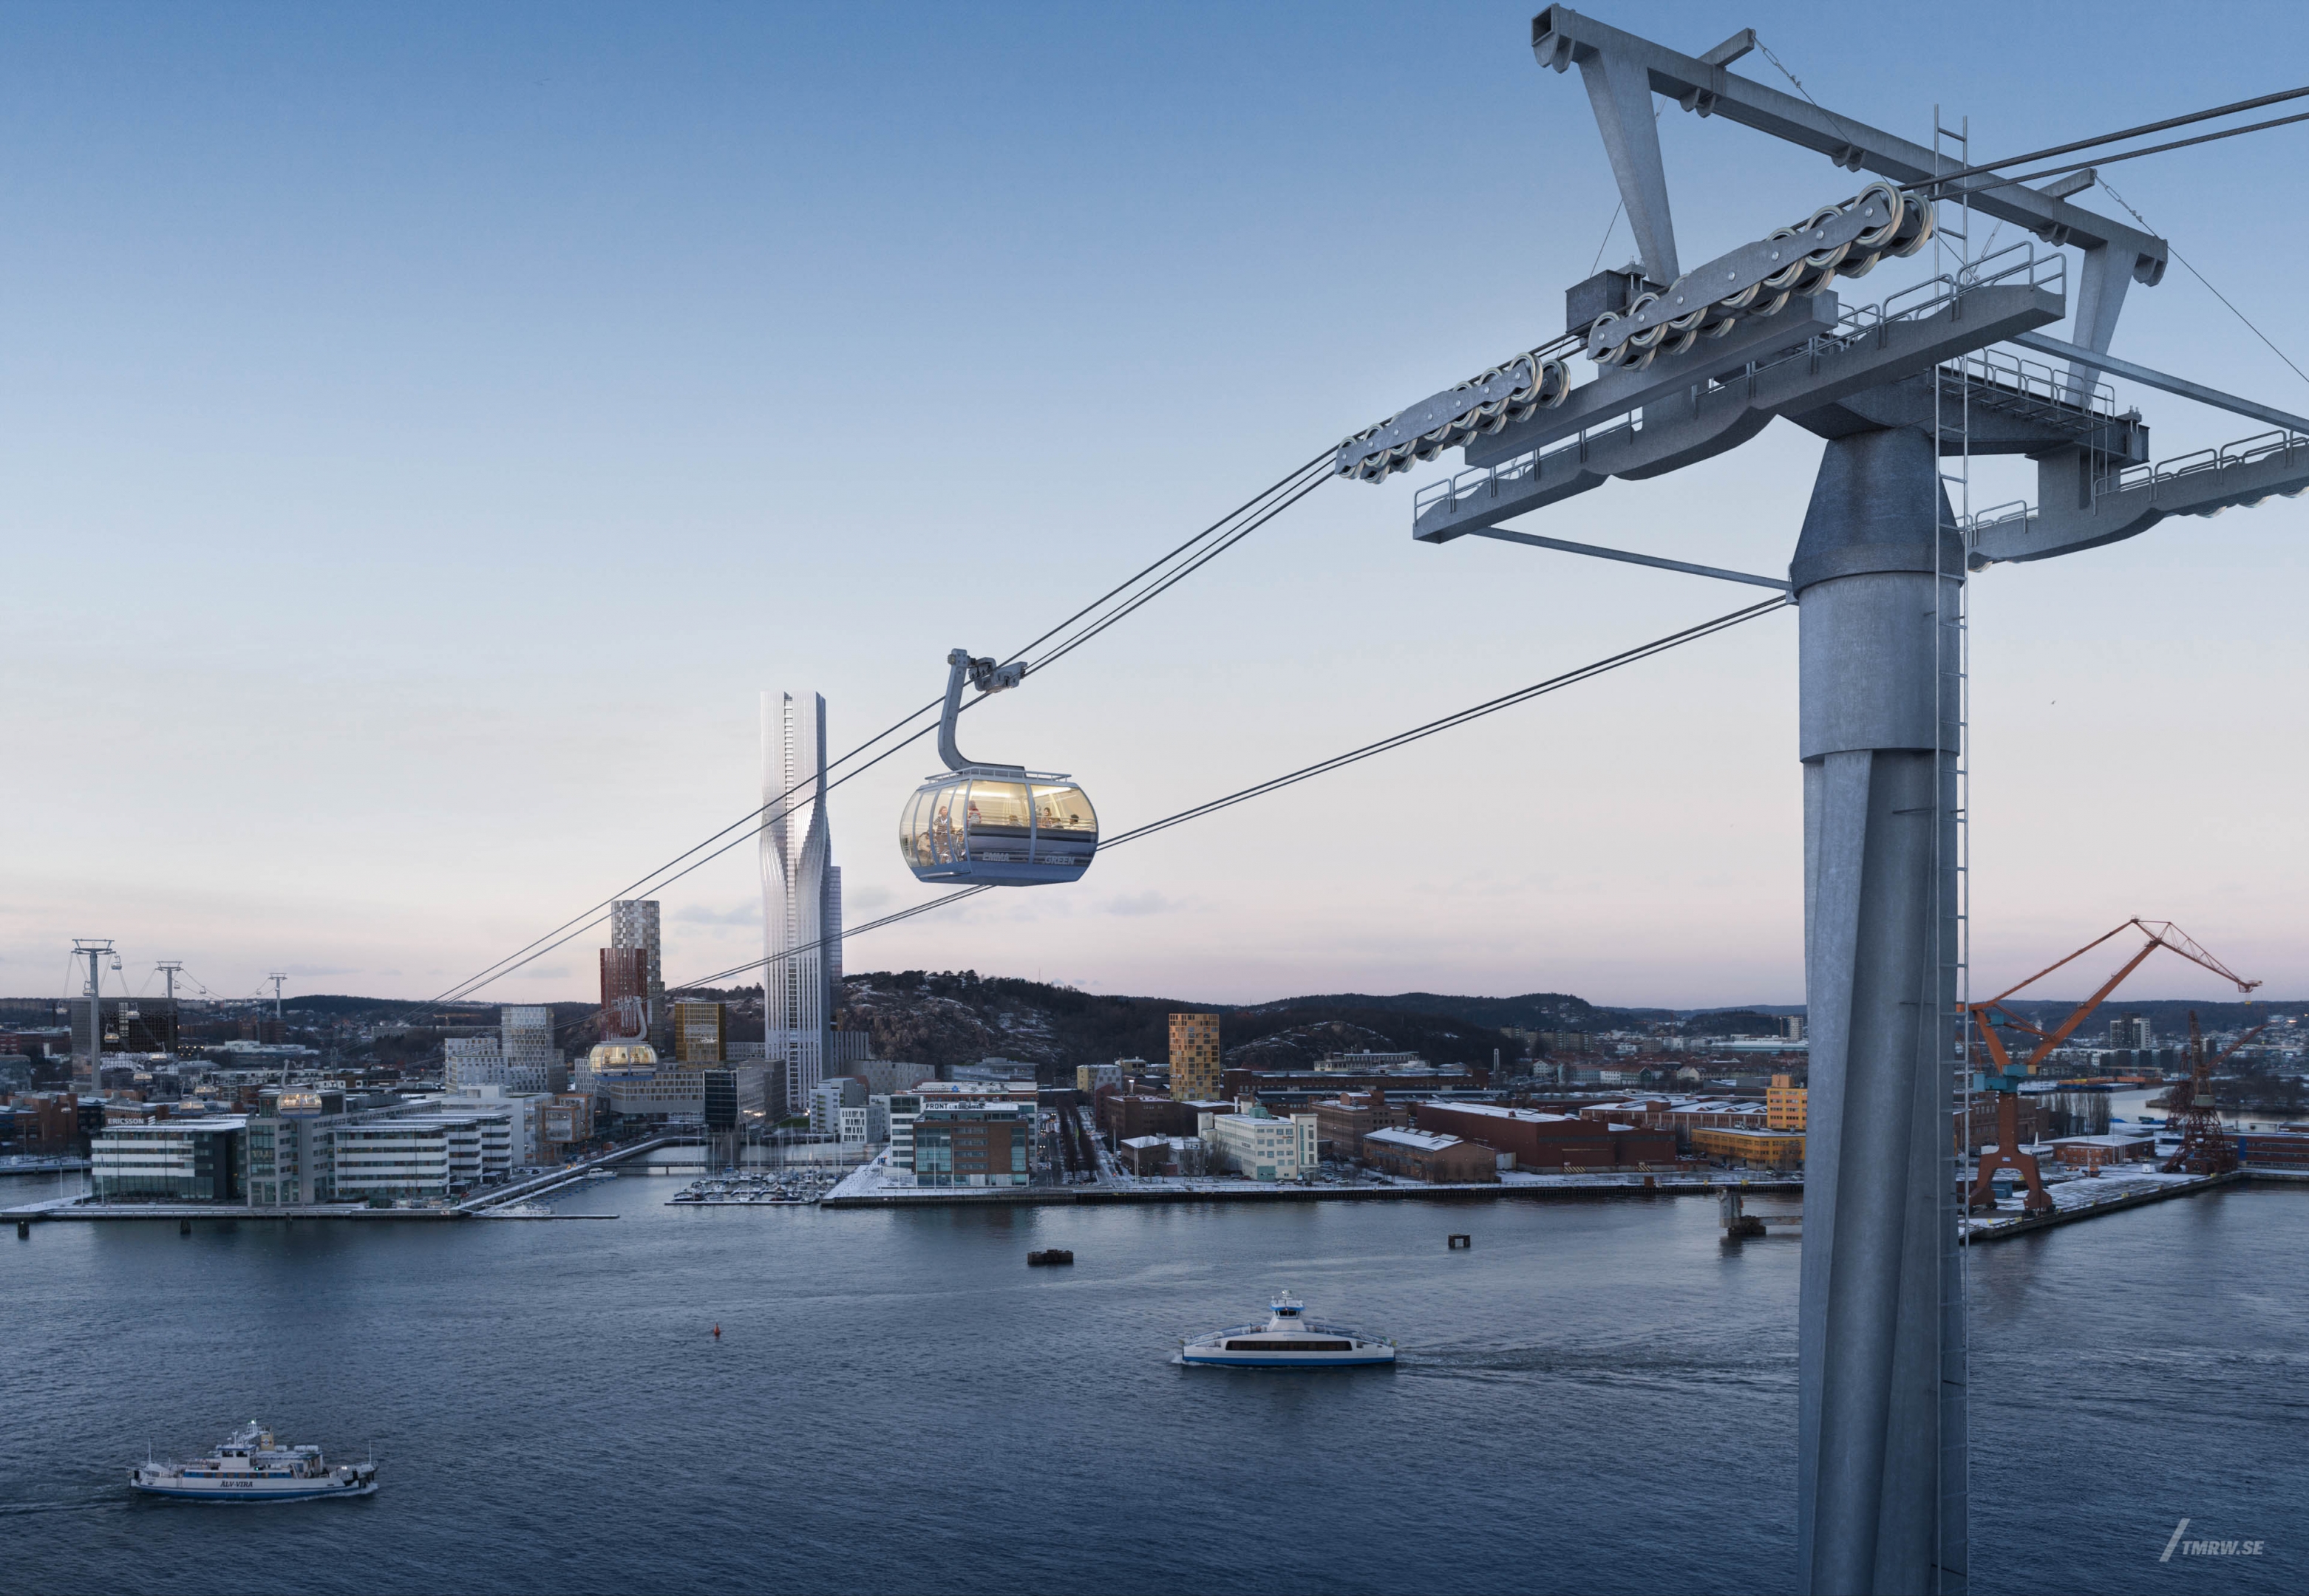 Architectural visualization of Linbanan for SBK a cableway oncept in Gothenburg in day light form a semi aerial view.